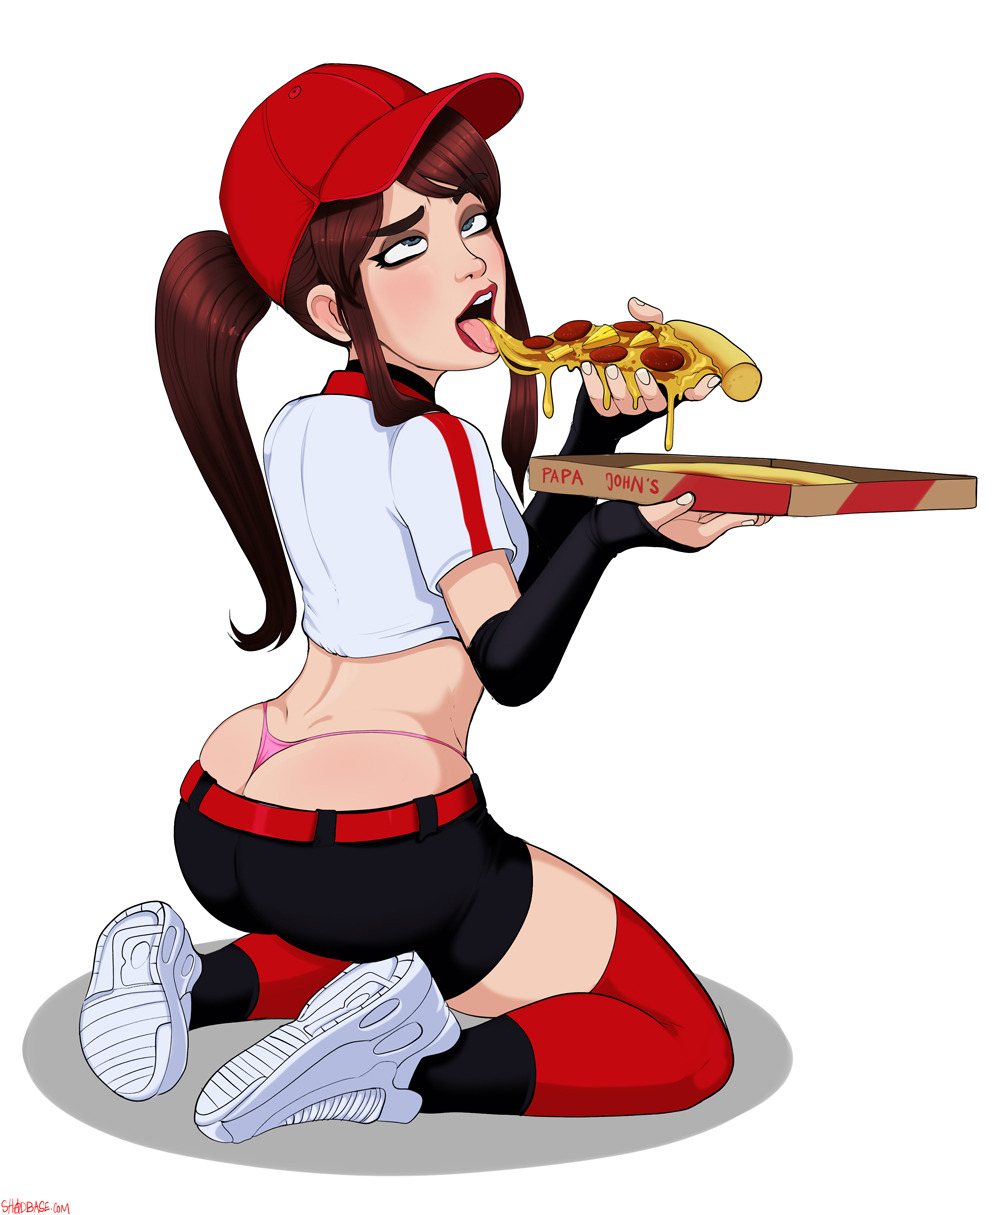 therealshadman: Pizza Delivery Trap, based on Sneakys Cosplay Twitter - Instagram